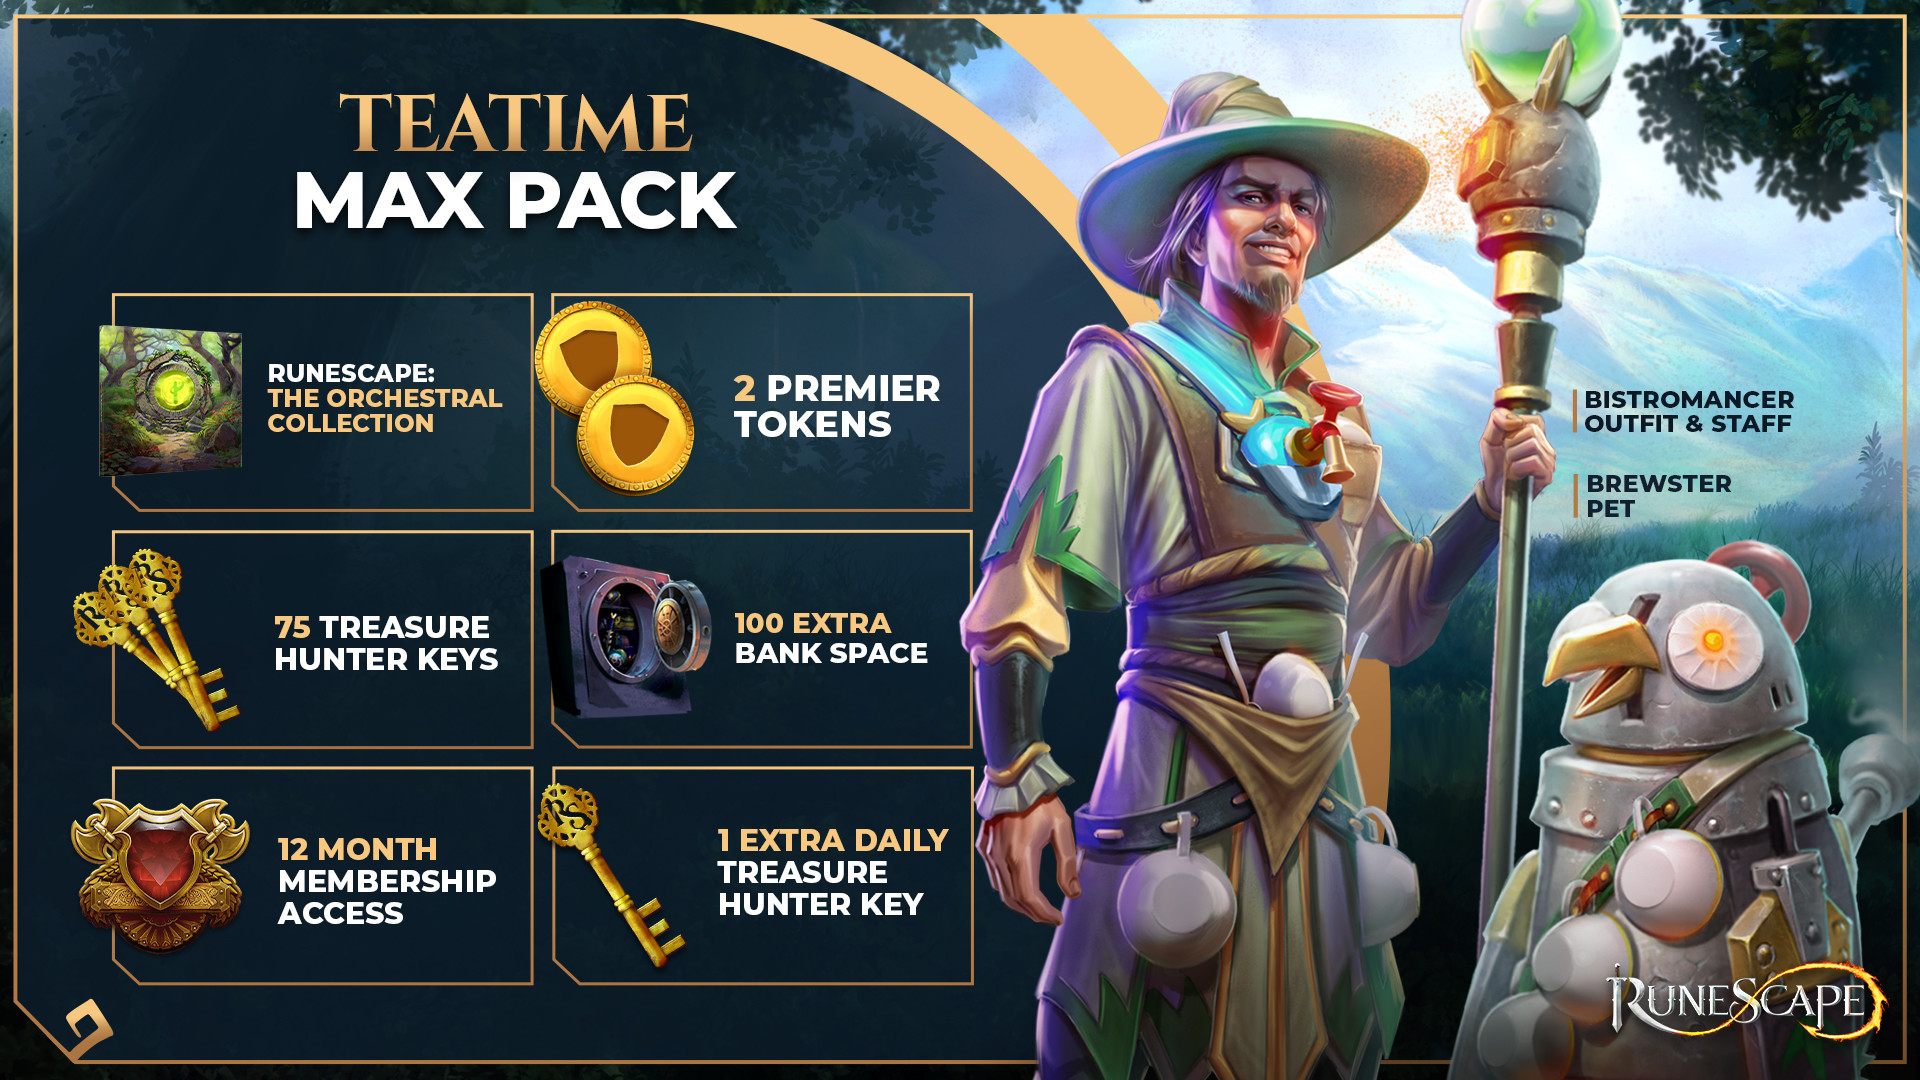 Runescape - Max Pack + 12 Months Membership Manual Delivery 56.49 $